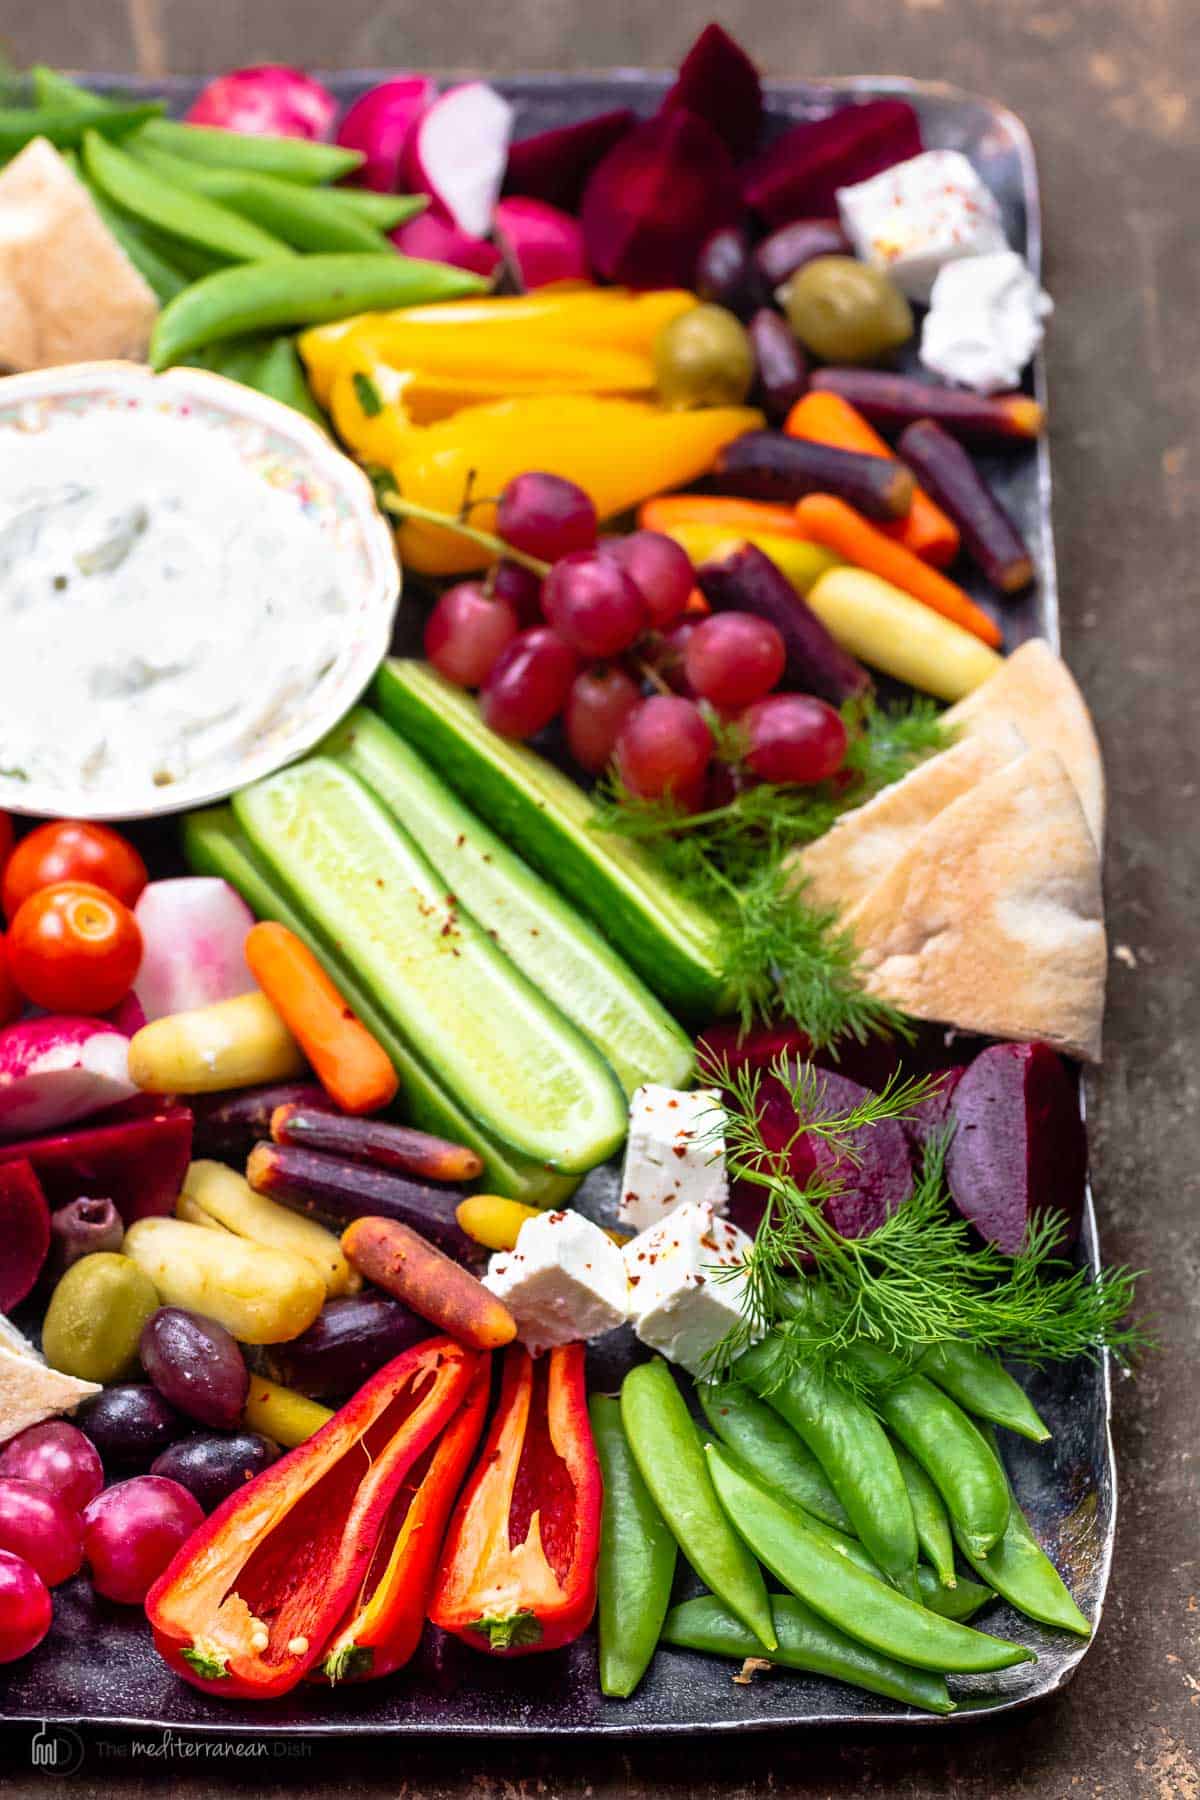 Crudite platter with fresh vegetables, feta cheese, tzatziki sauce, olives, and marinated beets